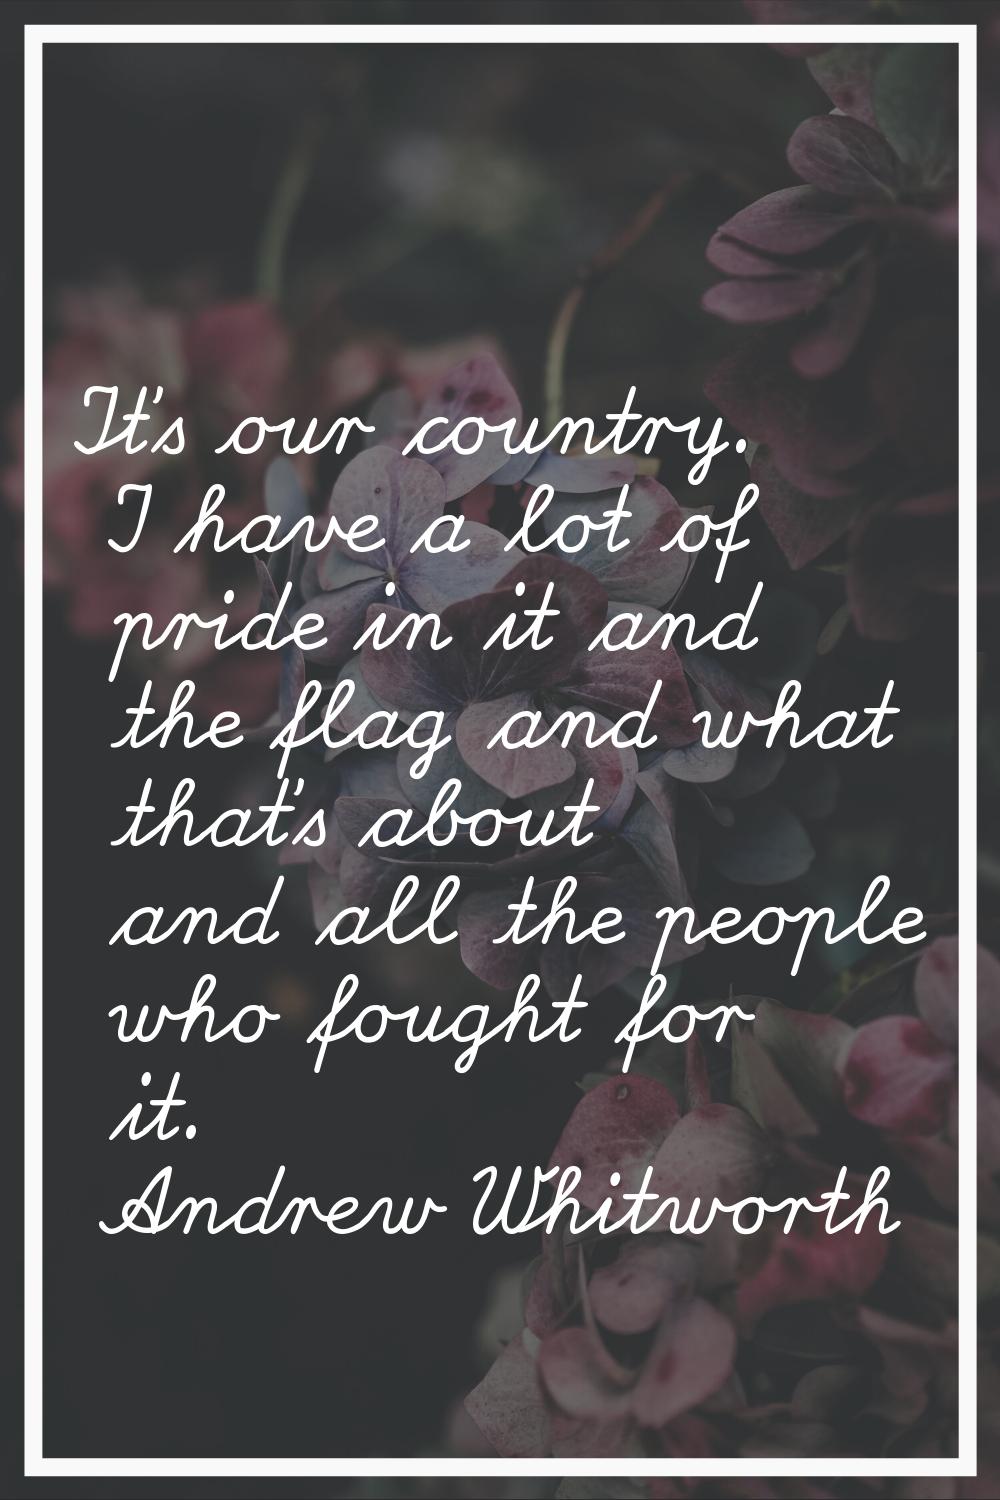 It's our country. I have a lot of pride in it and the flag and what that's about and all the people